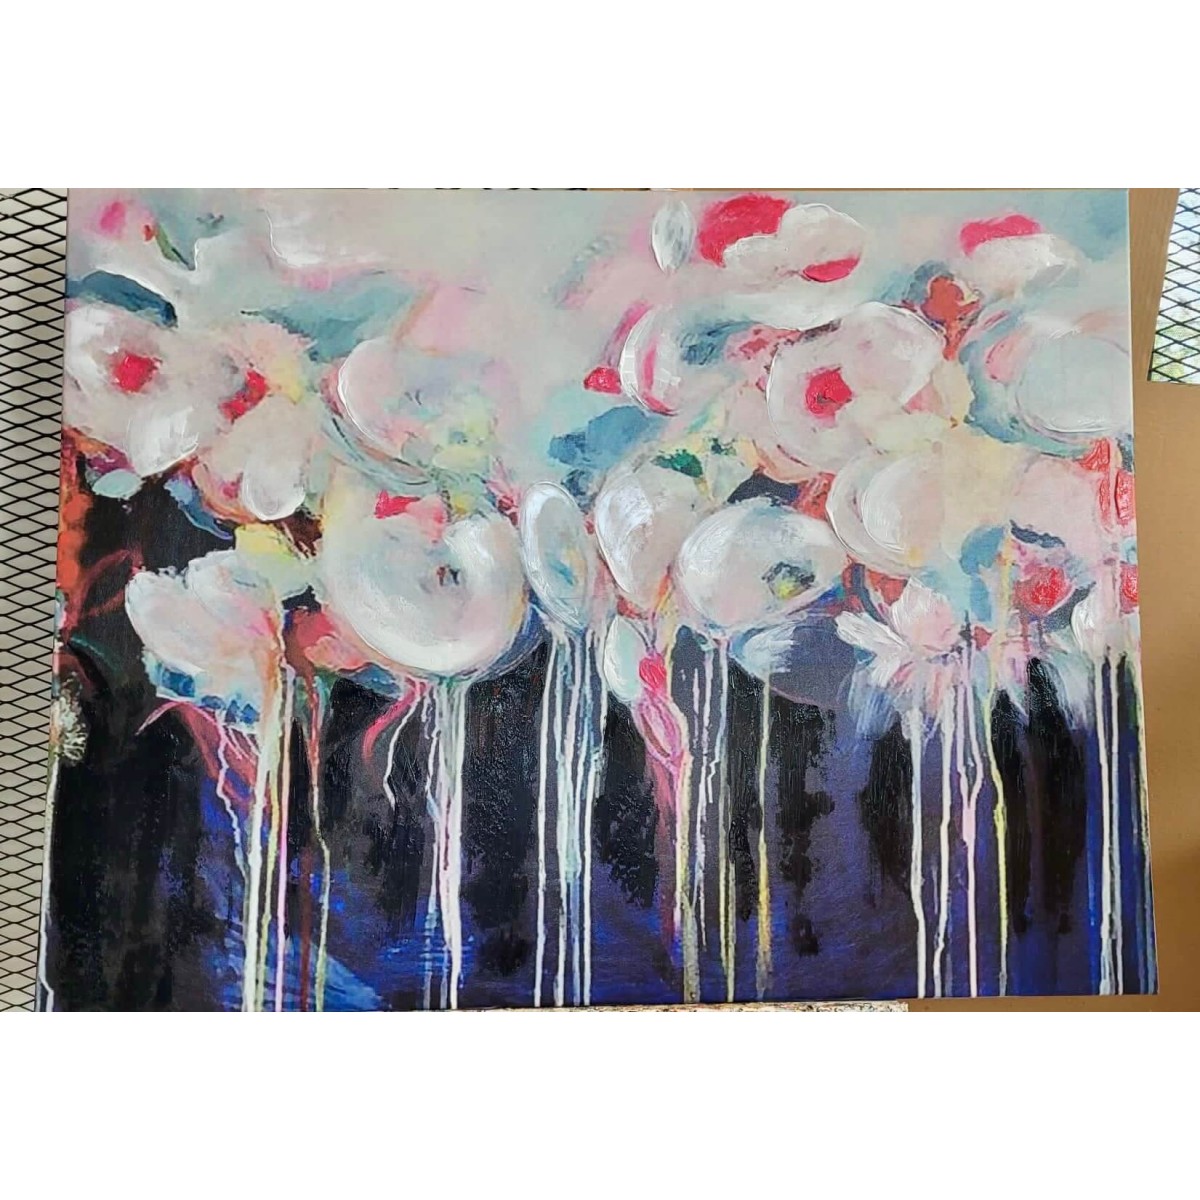 Colorful Flowers Abstract Textured Partial Oil Painting